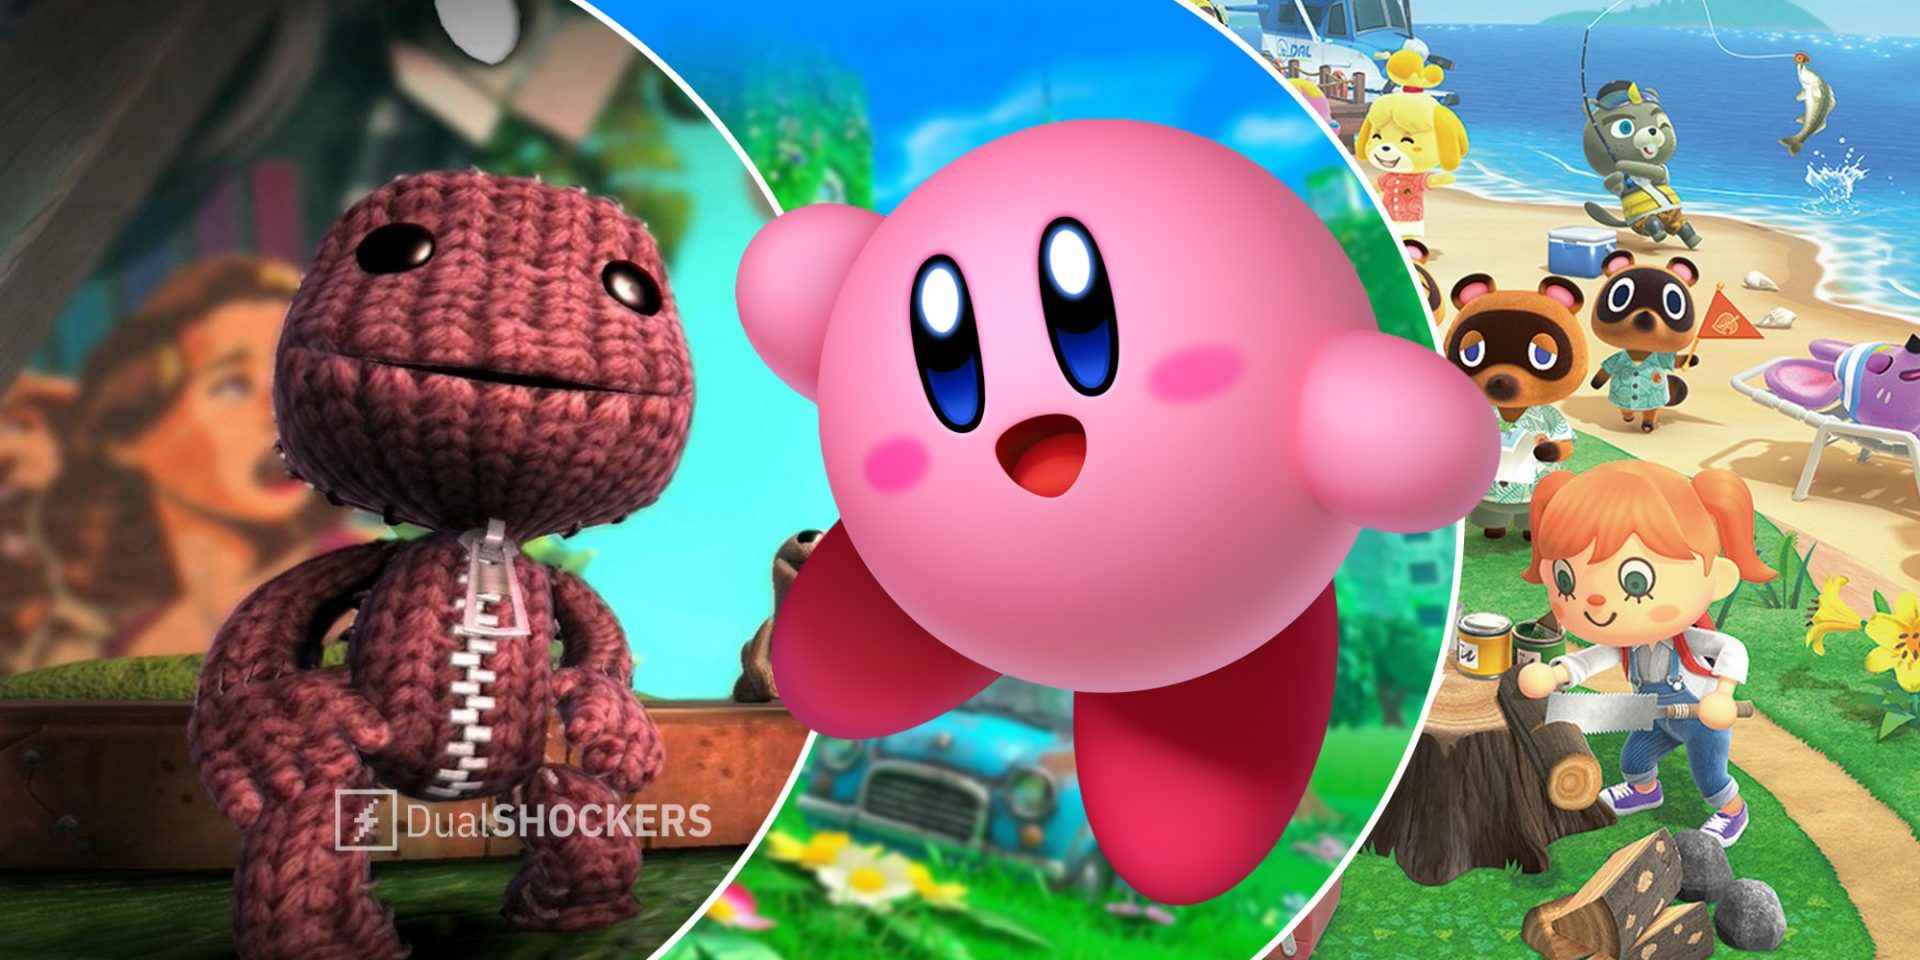 LittleBigPlanet on left, Kirby in middle, Animal Crossing New Horizons on right